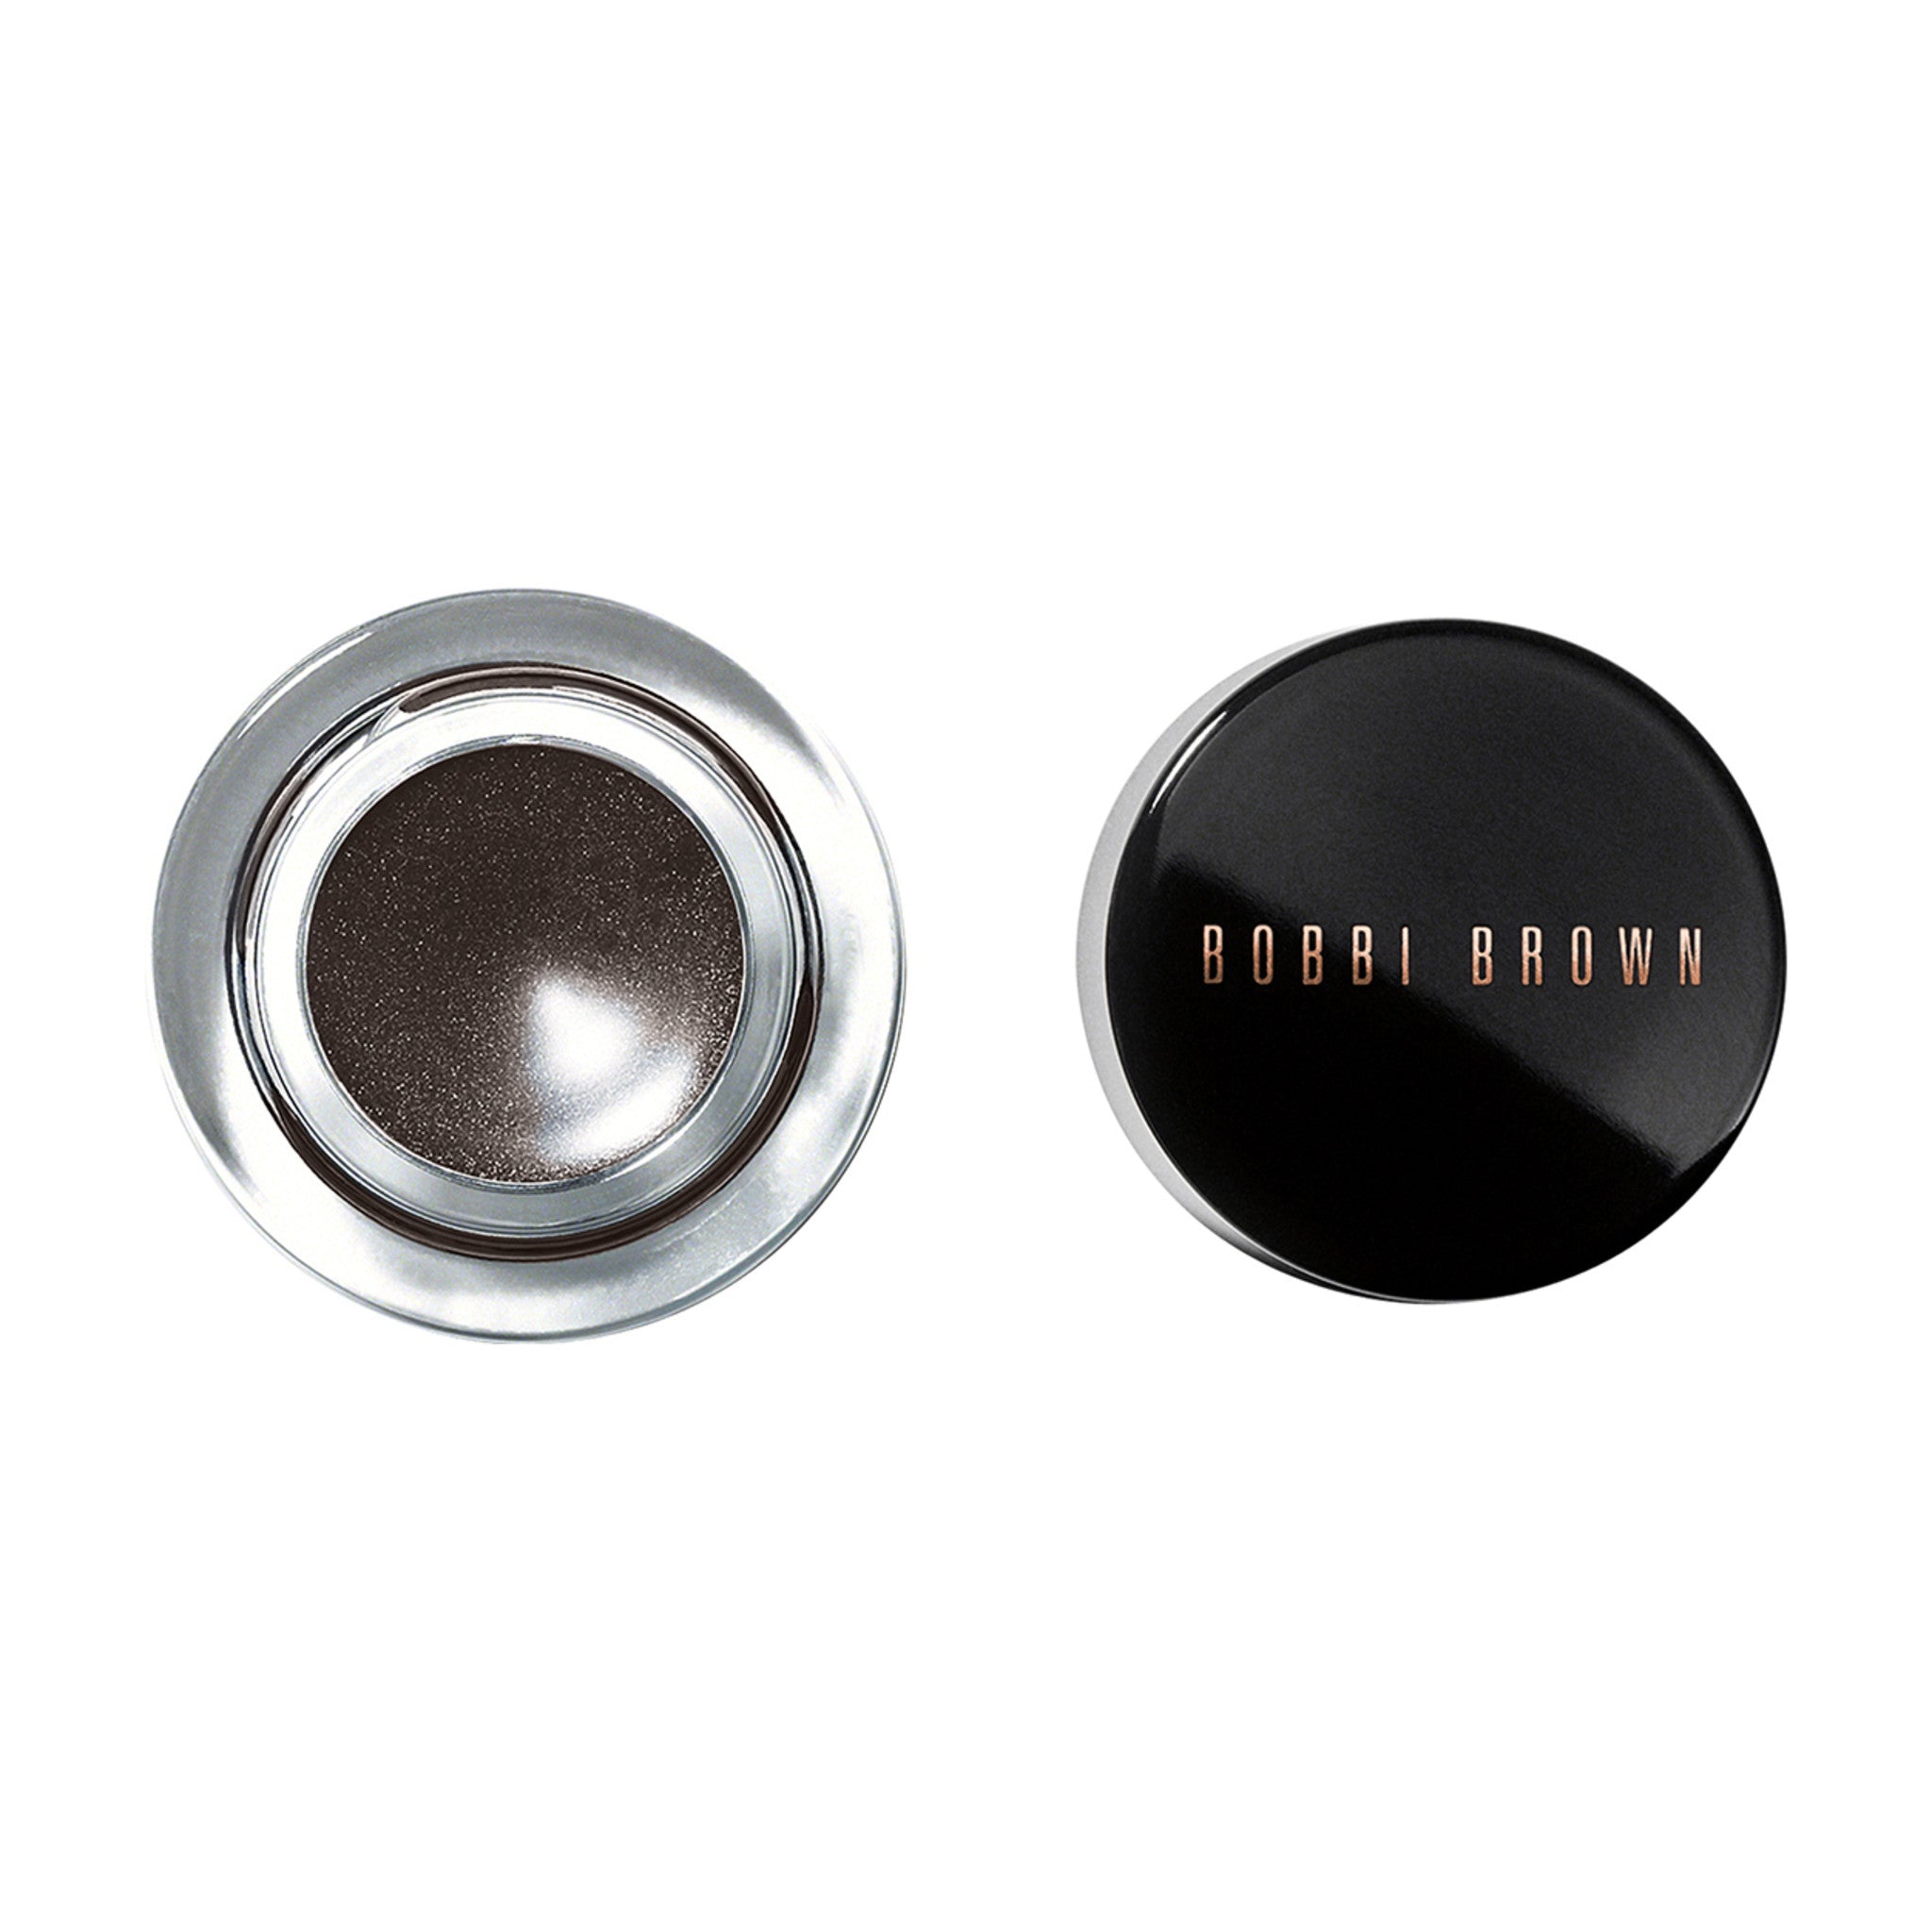 Bobbi Brown Long Wear Gel Eyeliner Color/Shade variant: Espresso Ink main image. This product is in the color black